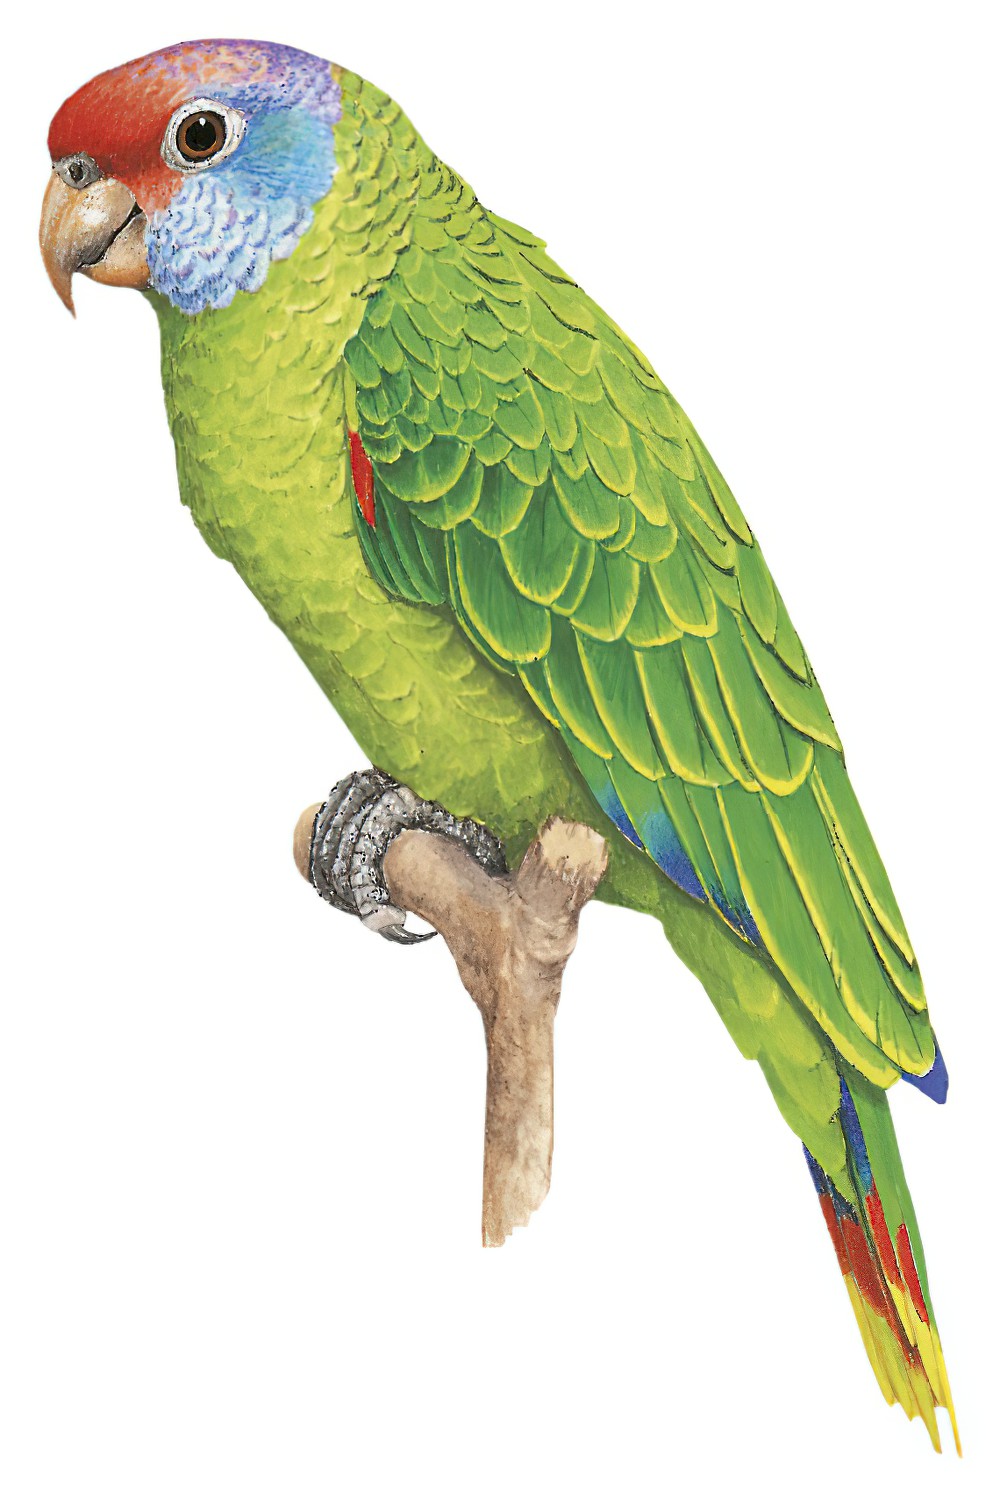 Red-tailed Parrot / Amazona brasiliensis